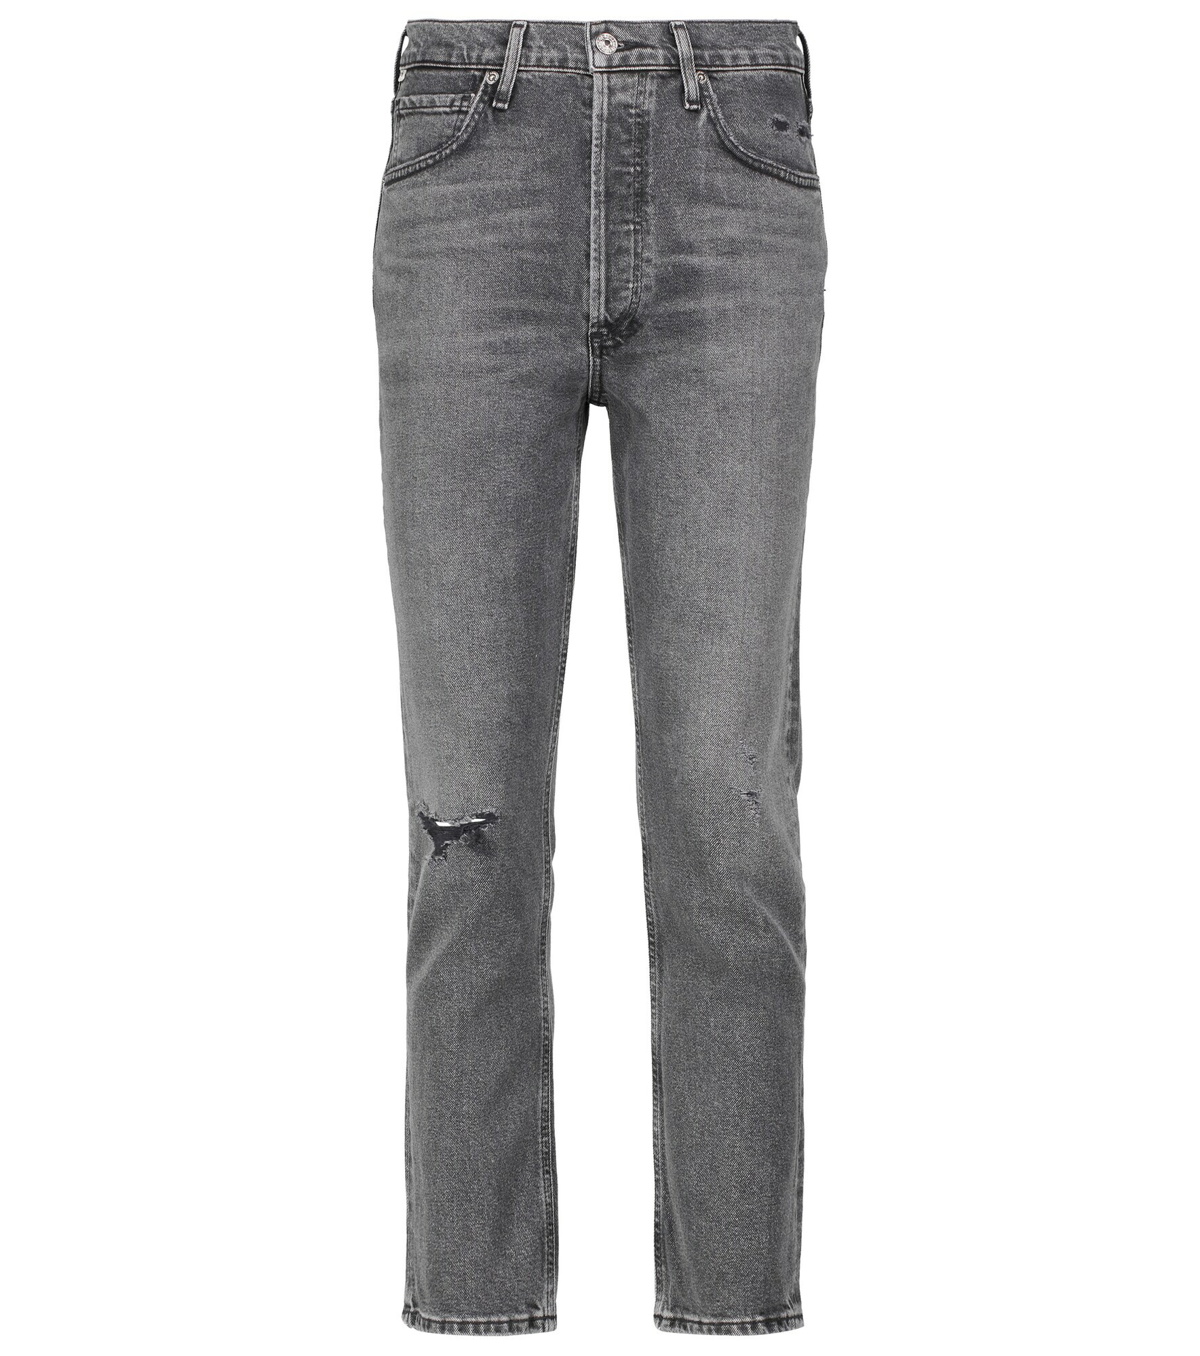 Citizens of Humanity - Eva high-rise straight jeans Citizens of Humanity